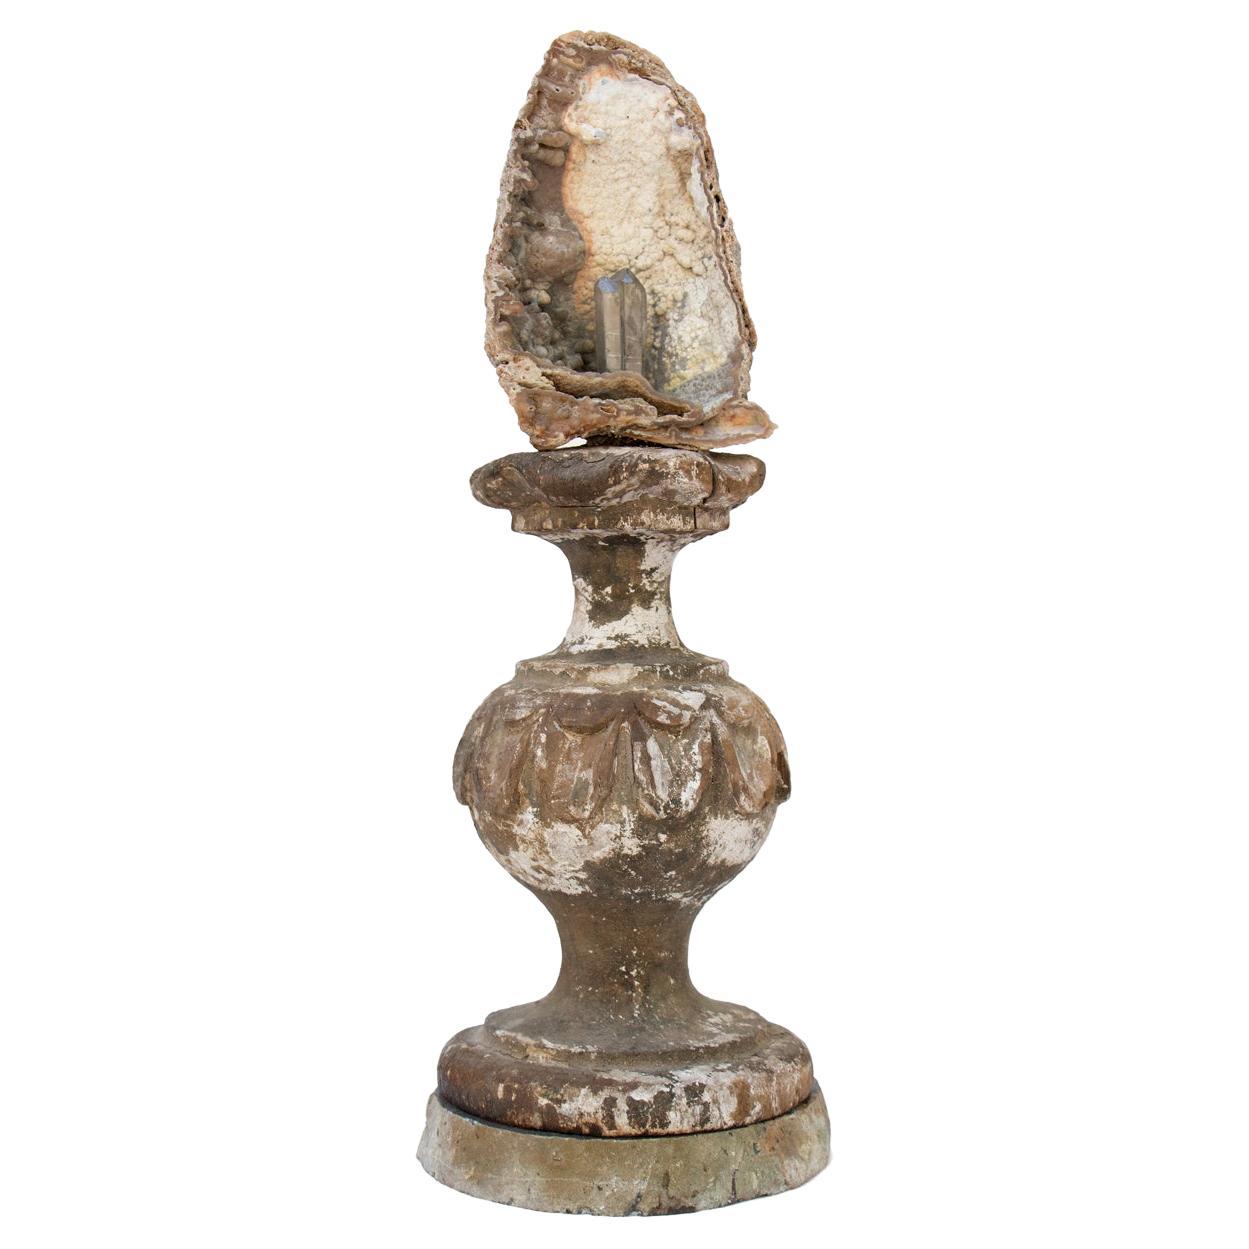 17th Century Italian Vase with Polished Agate Coral and a Double Crystal Point